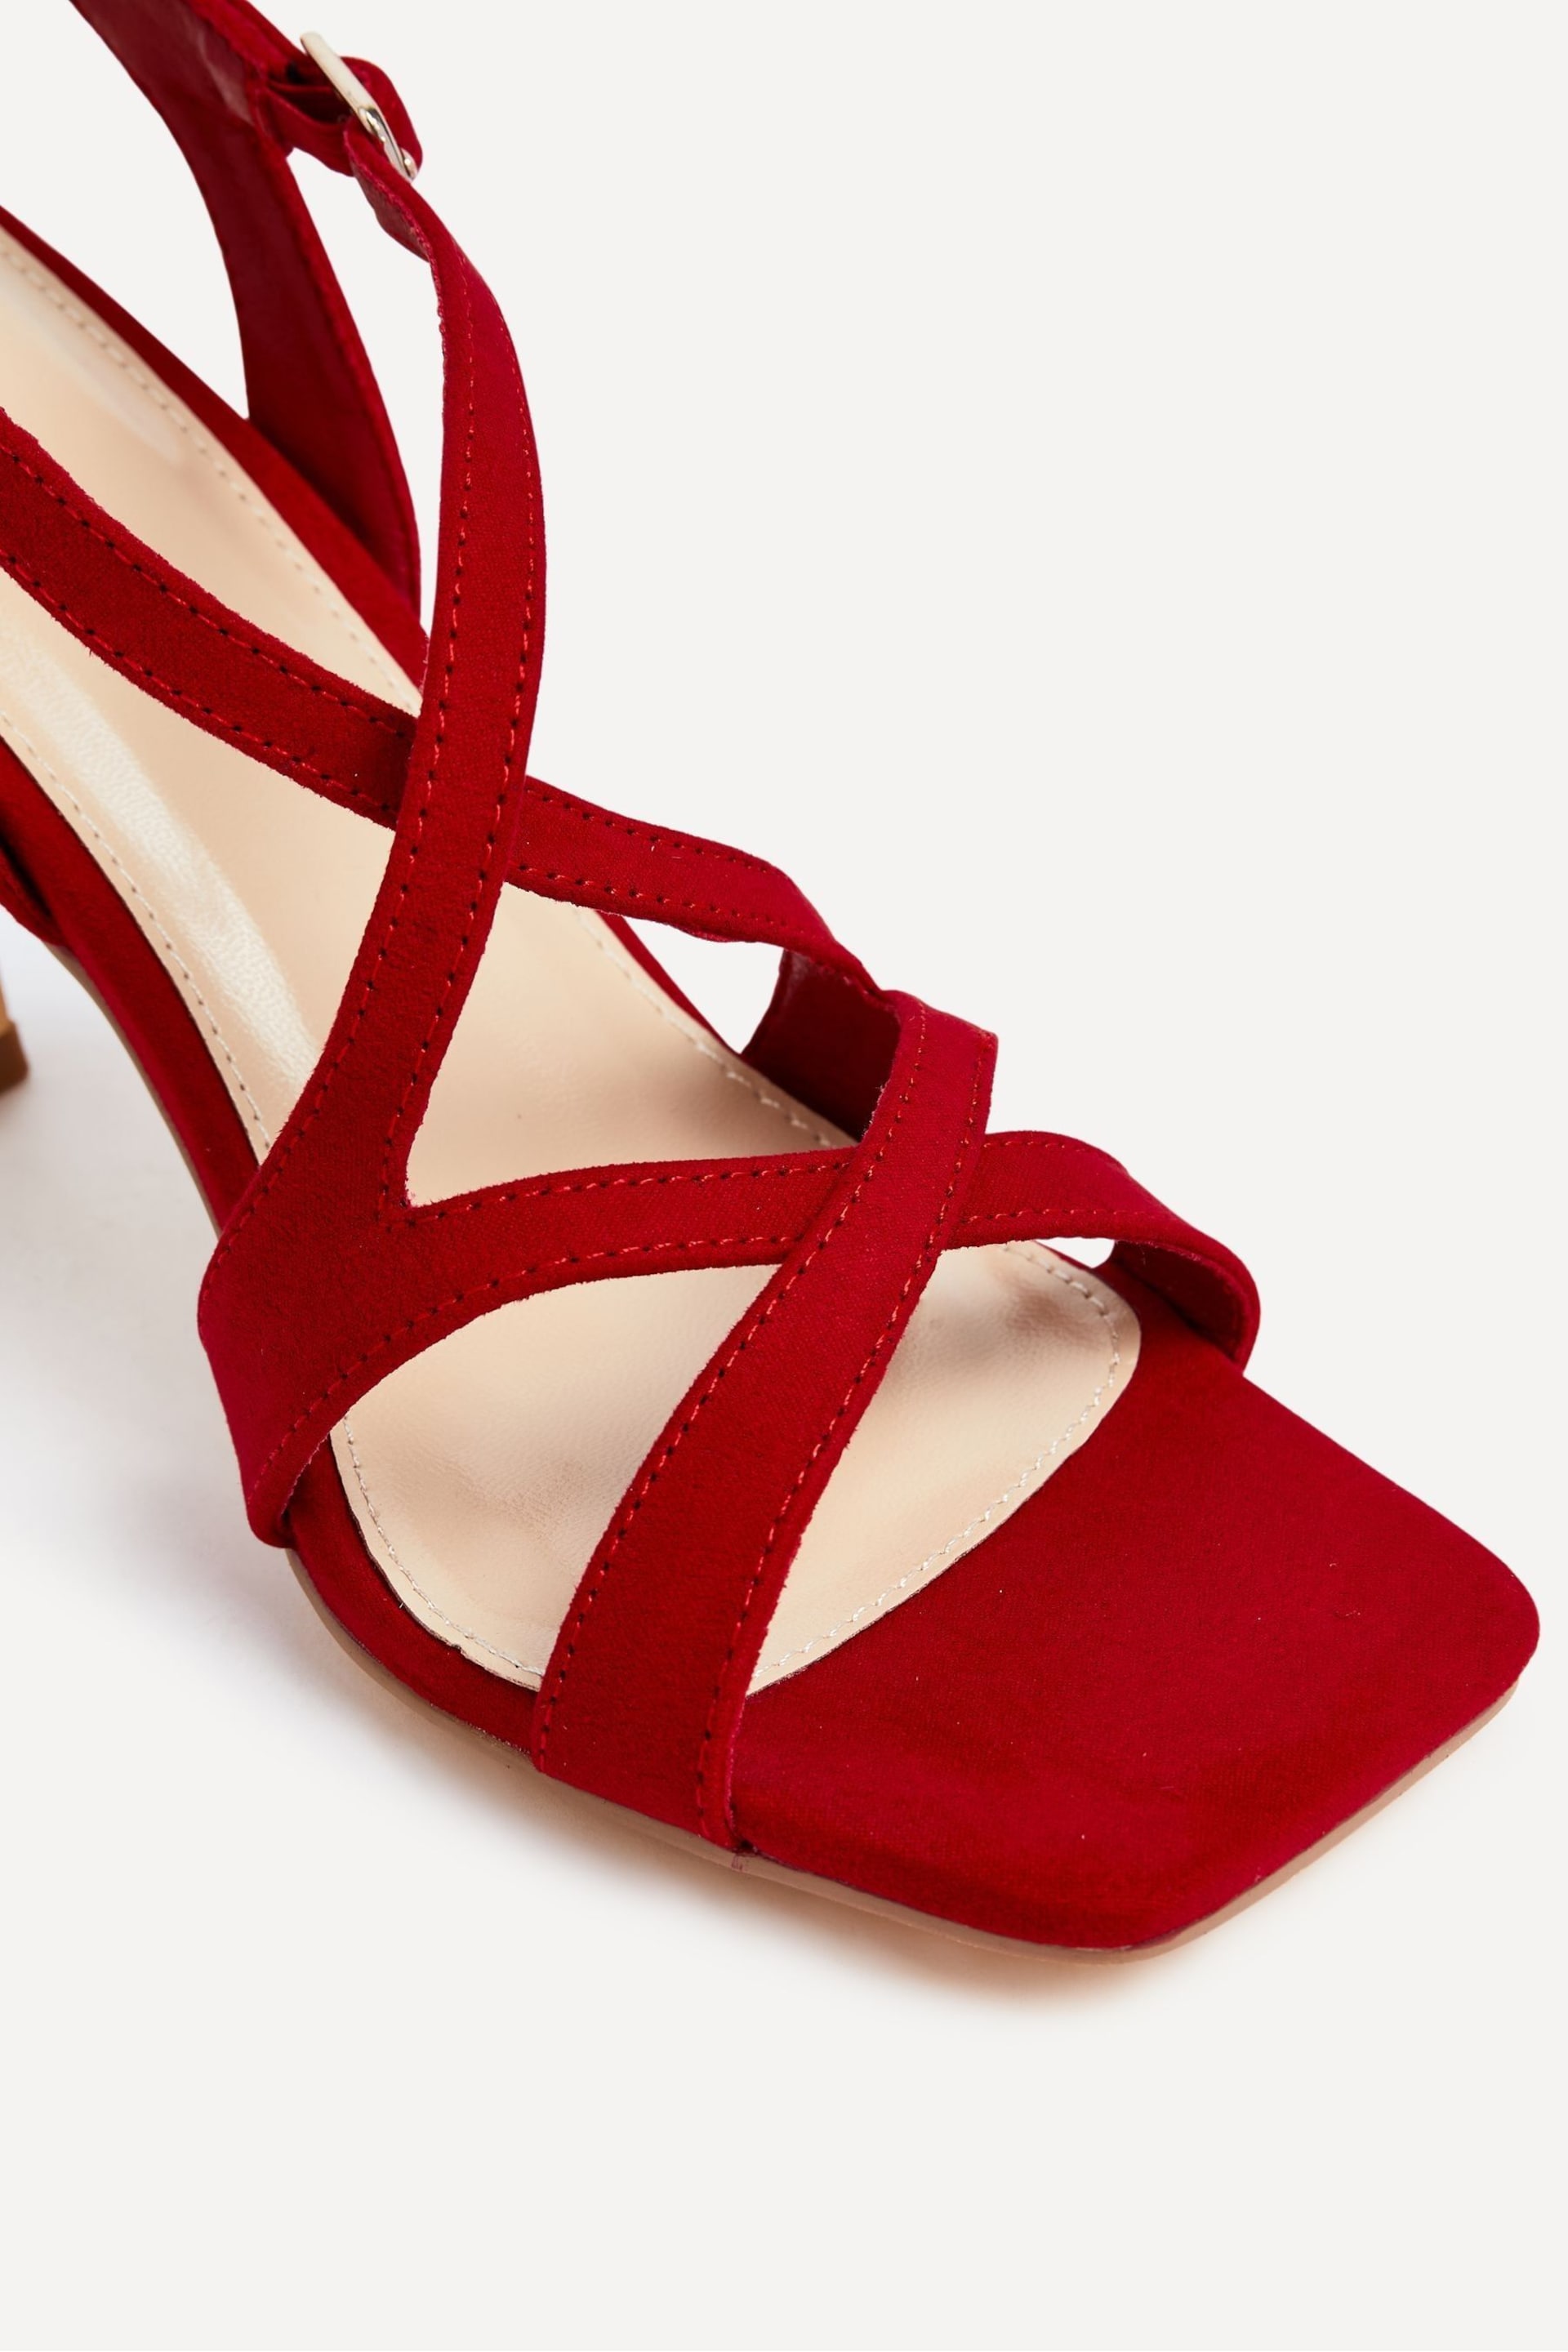 Linzi Red Liberty Open Toe Strappy Heeled Sandals With Flared Stiletto - Image 4 of 5